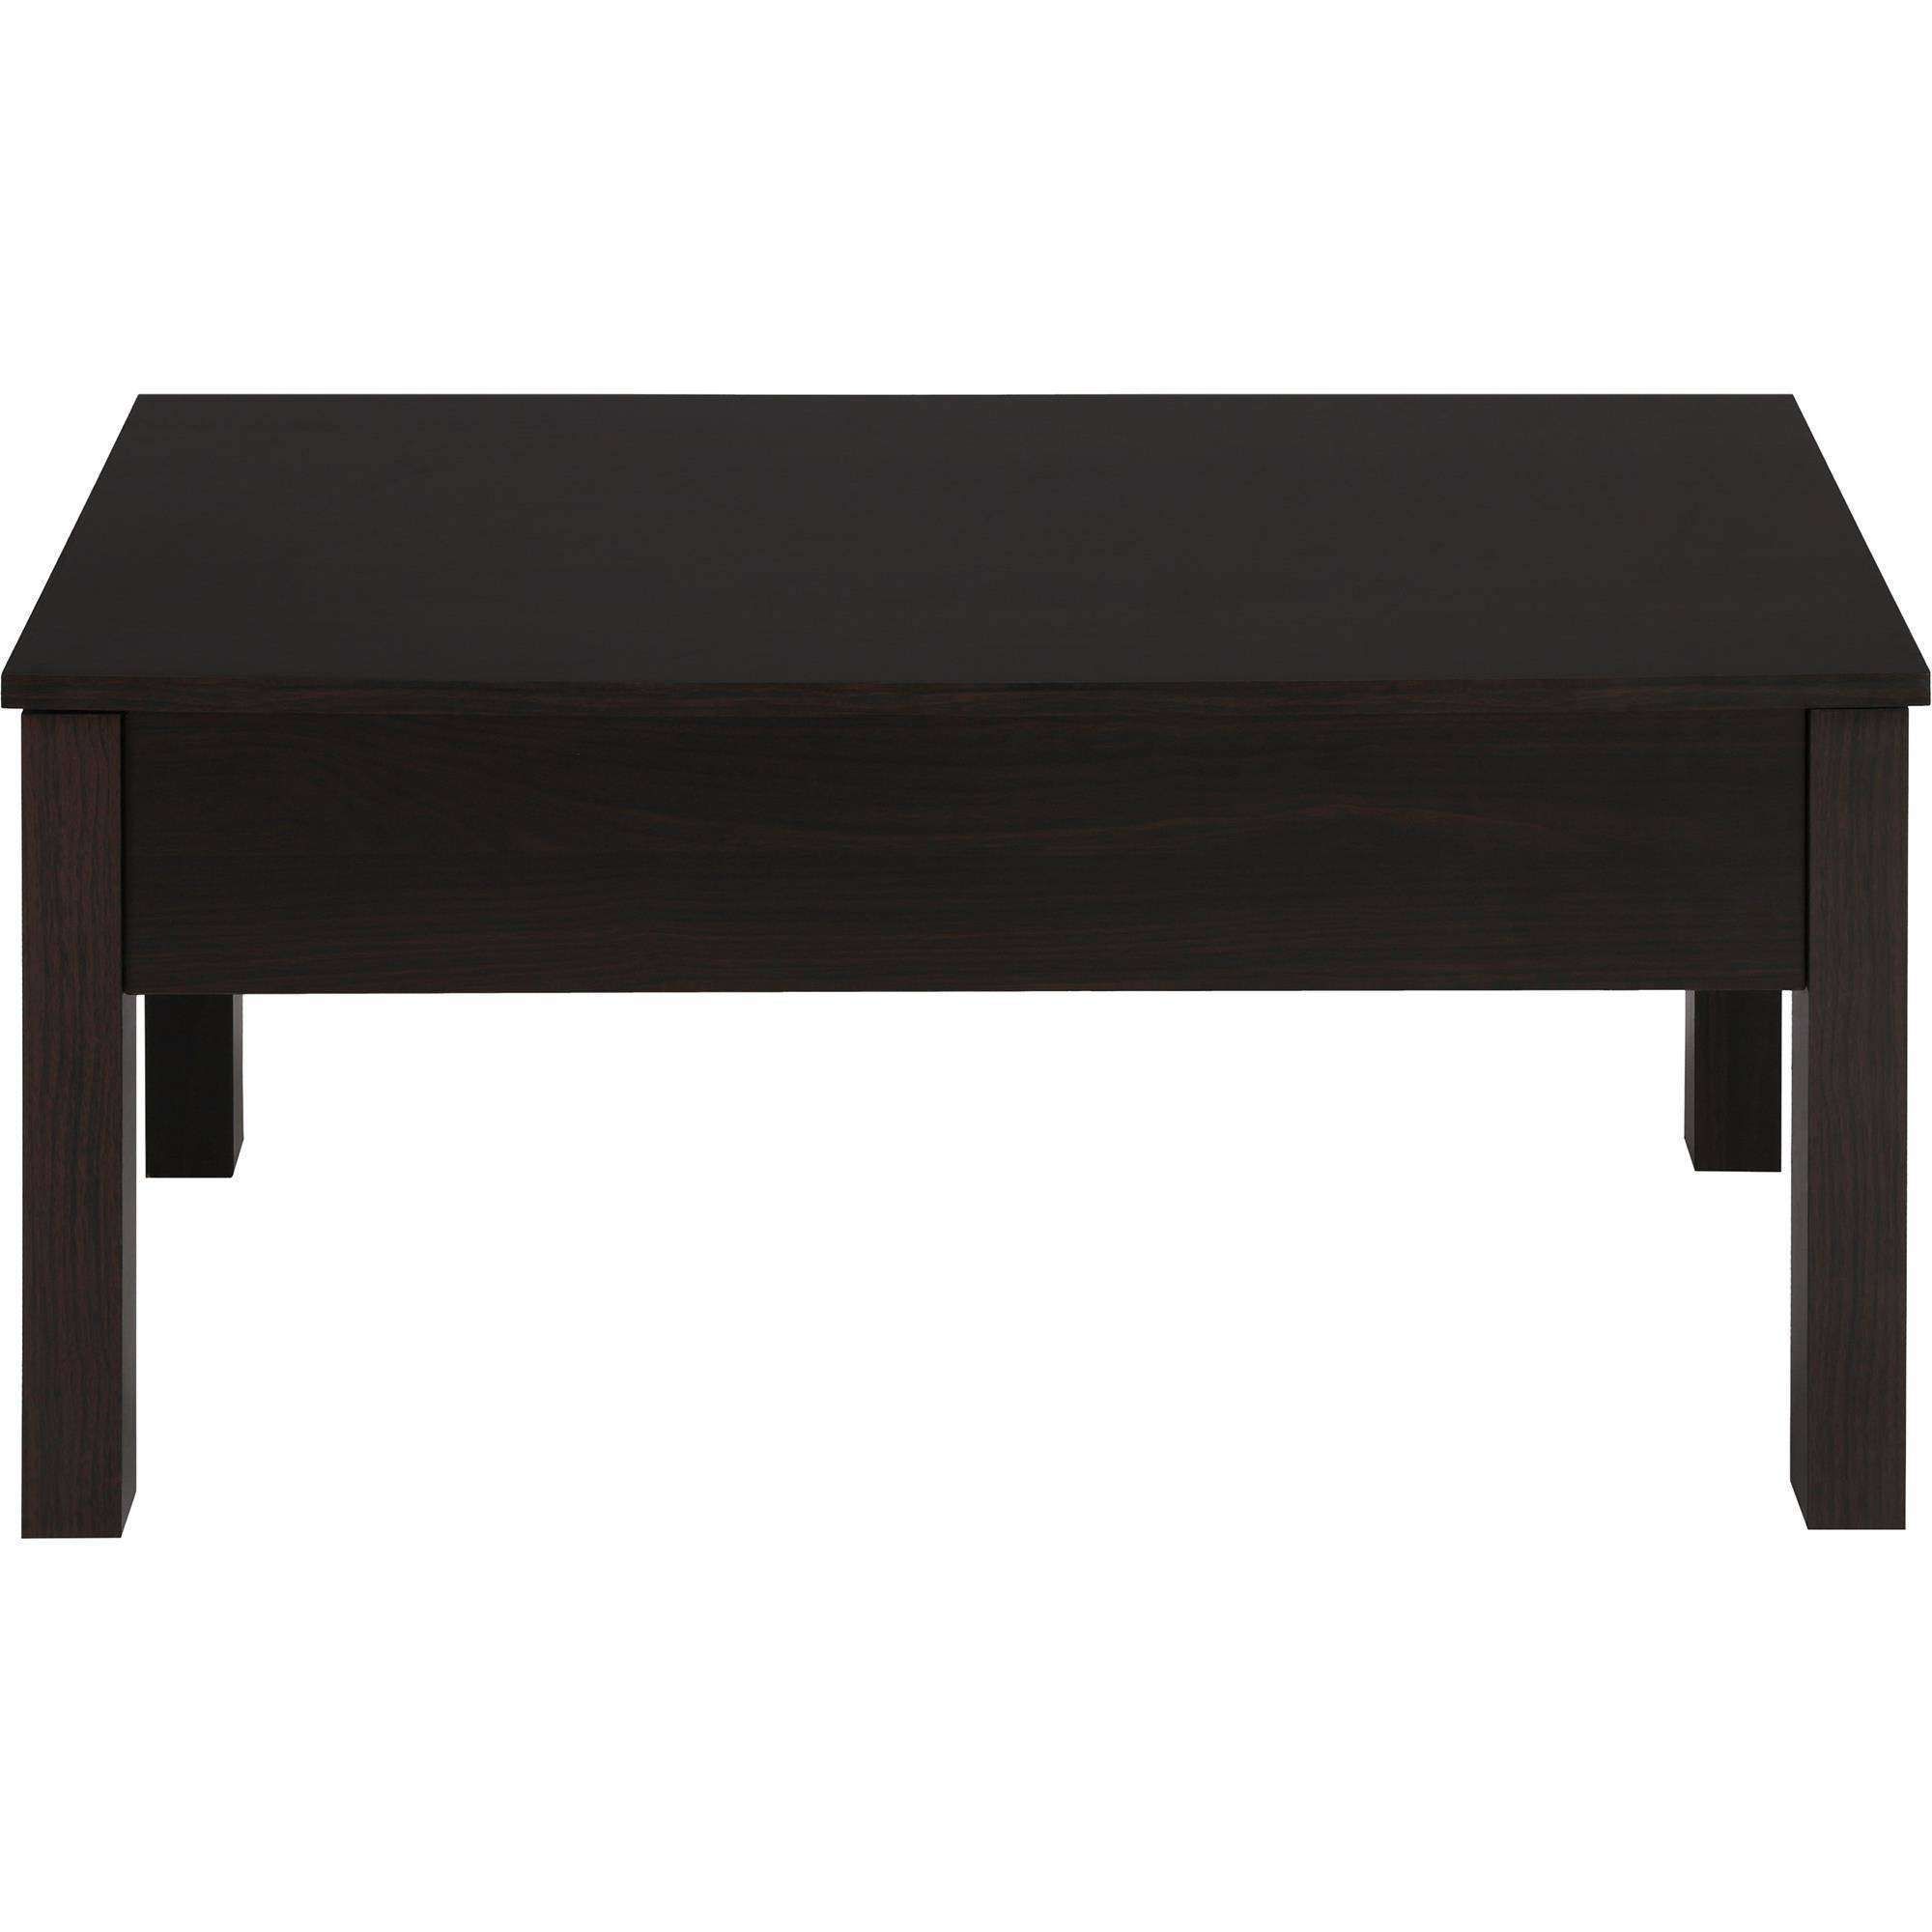 Most Up To Date Swing Up Coffee Tables Regarding Mainstays Lift Top Coffee Table, Multiple Colors – Walmart (View 15 of 20)